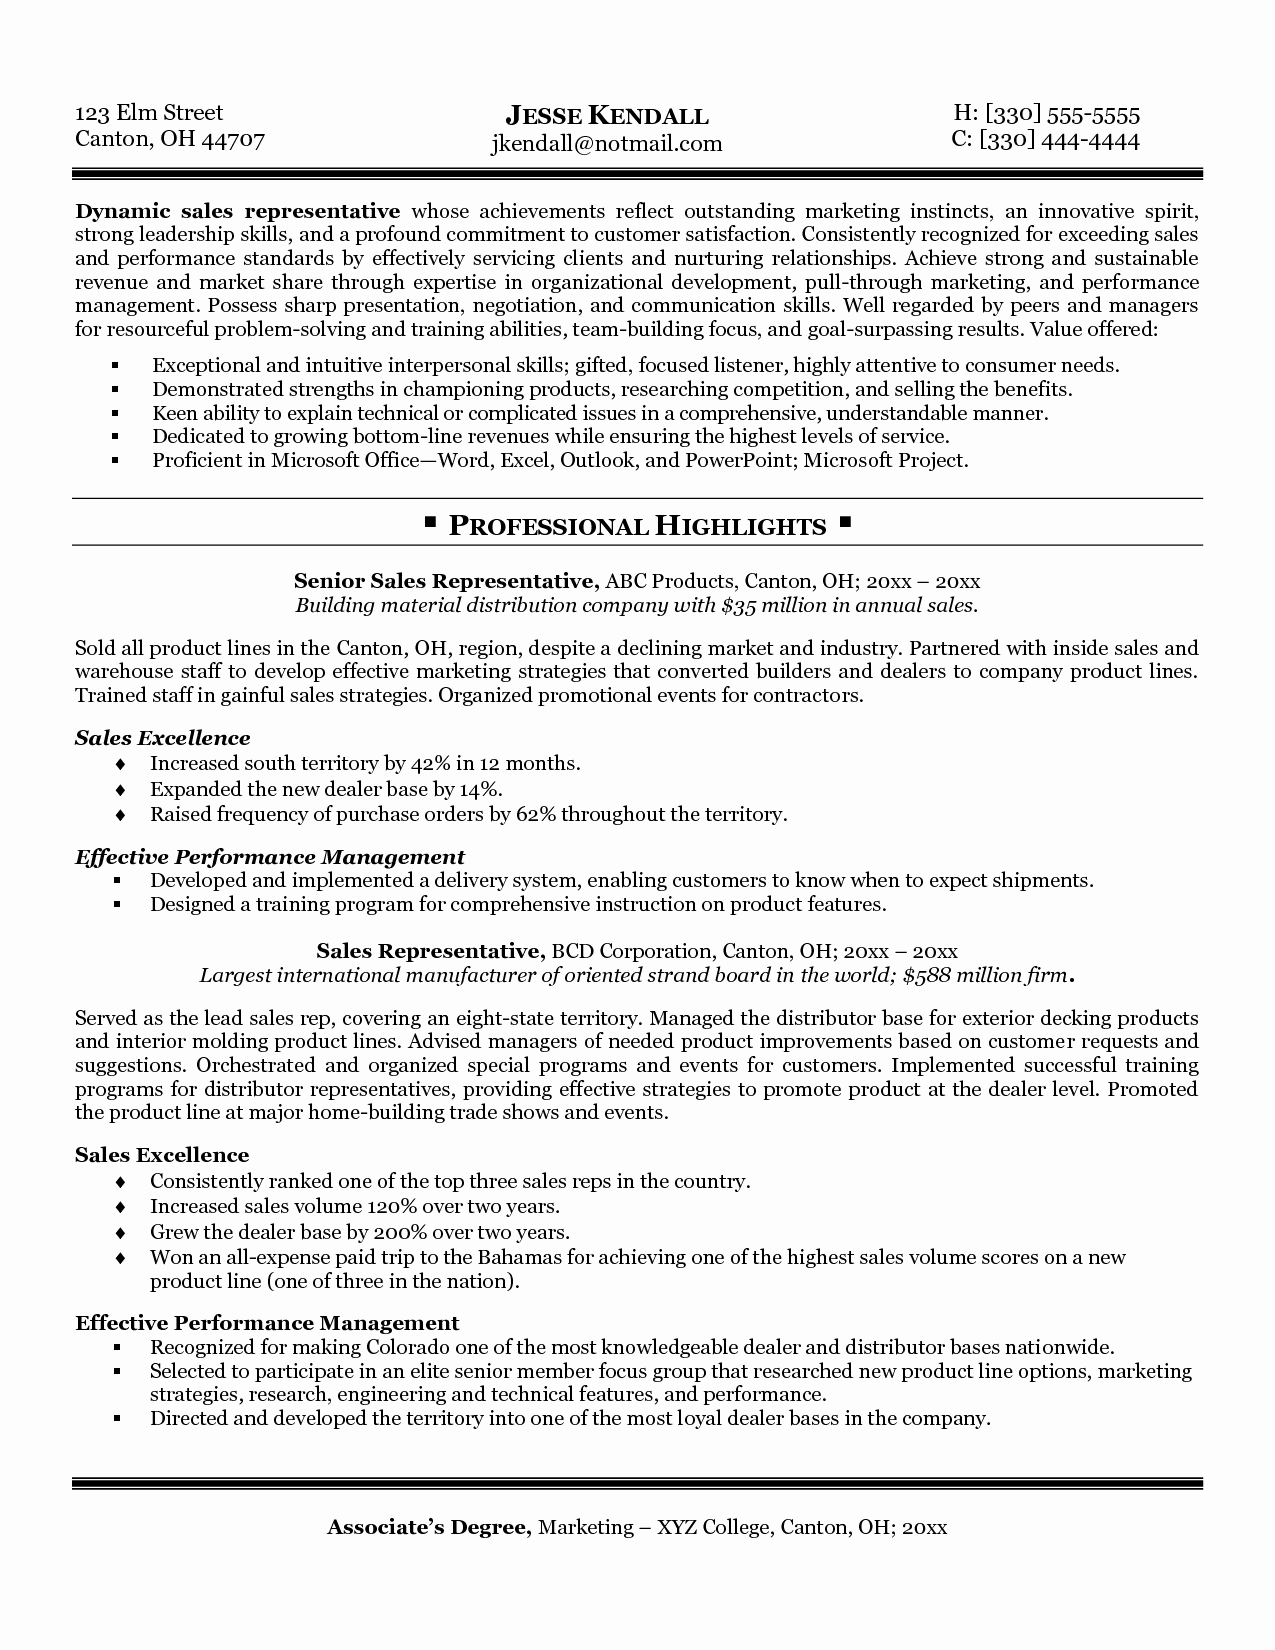 Medical Sales Cover Letter Beautiful 9 10 Medical Sales Rep Resume Example